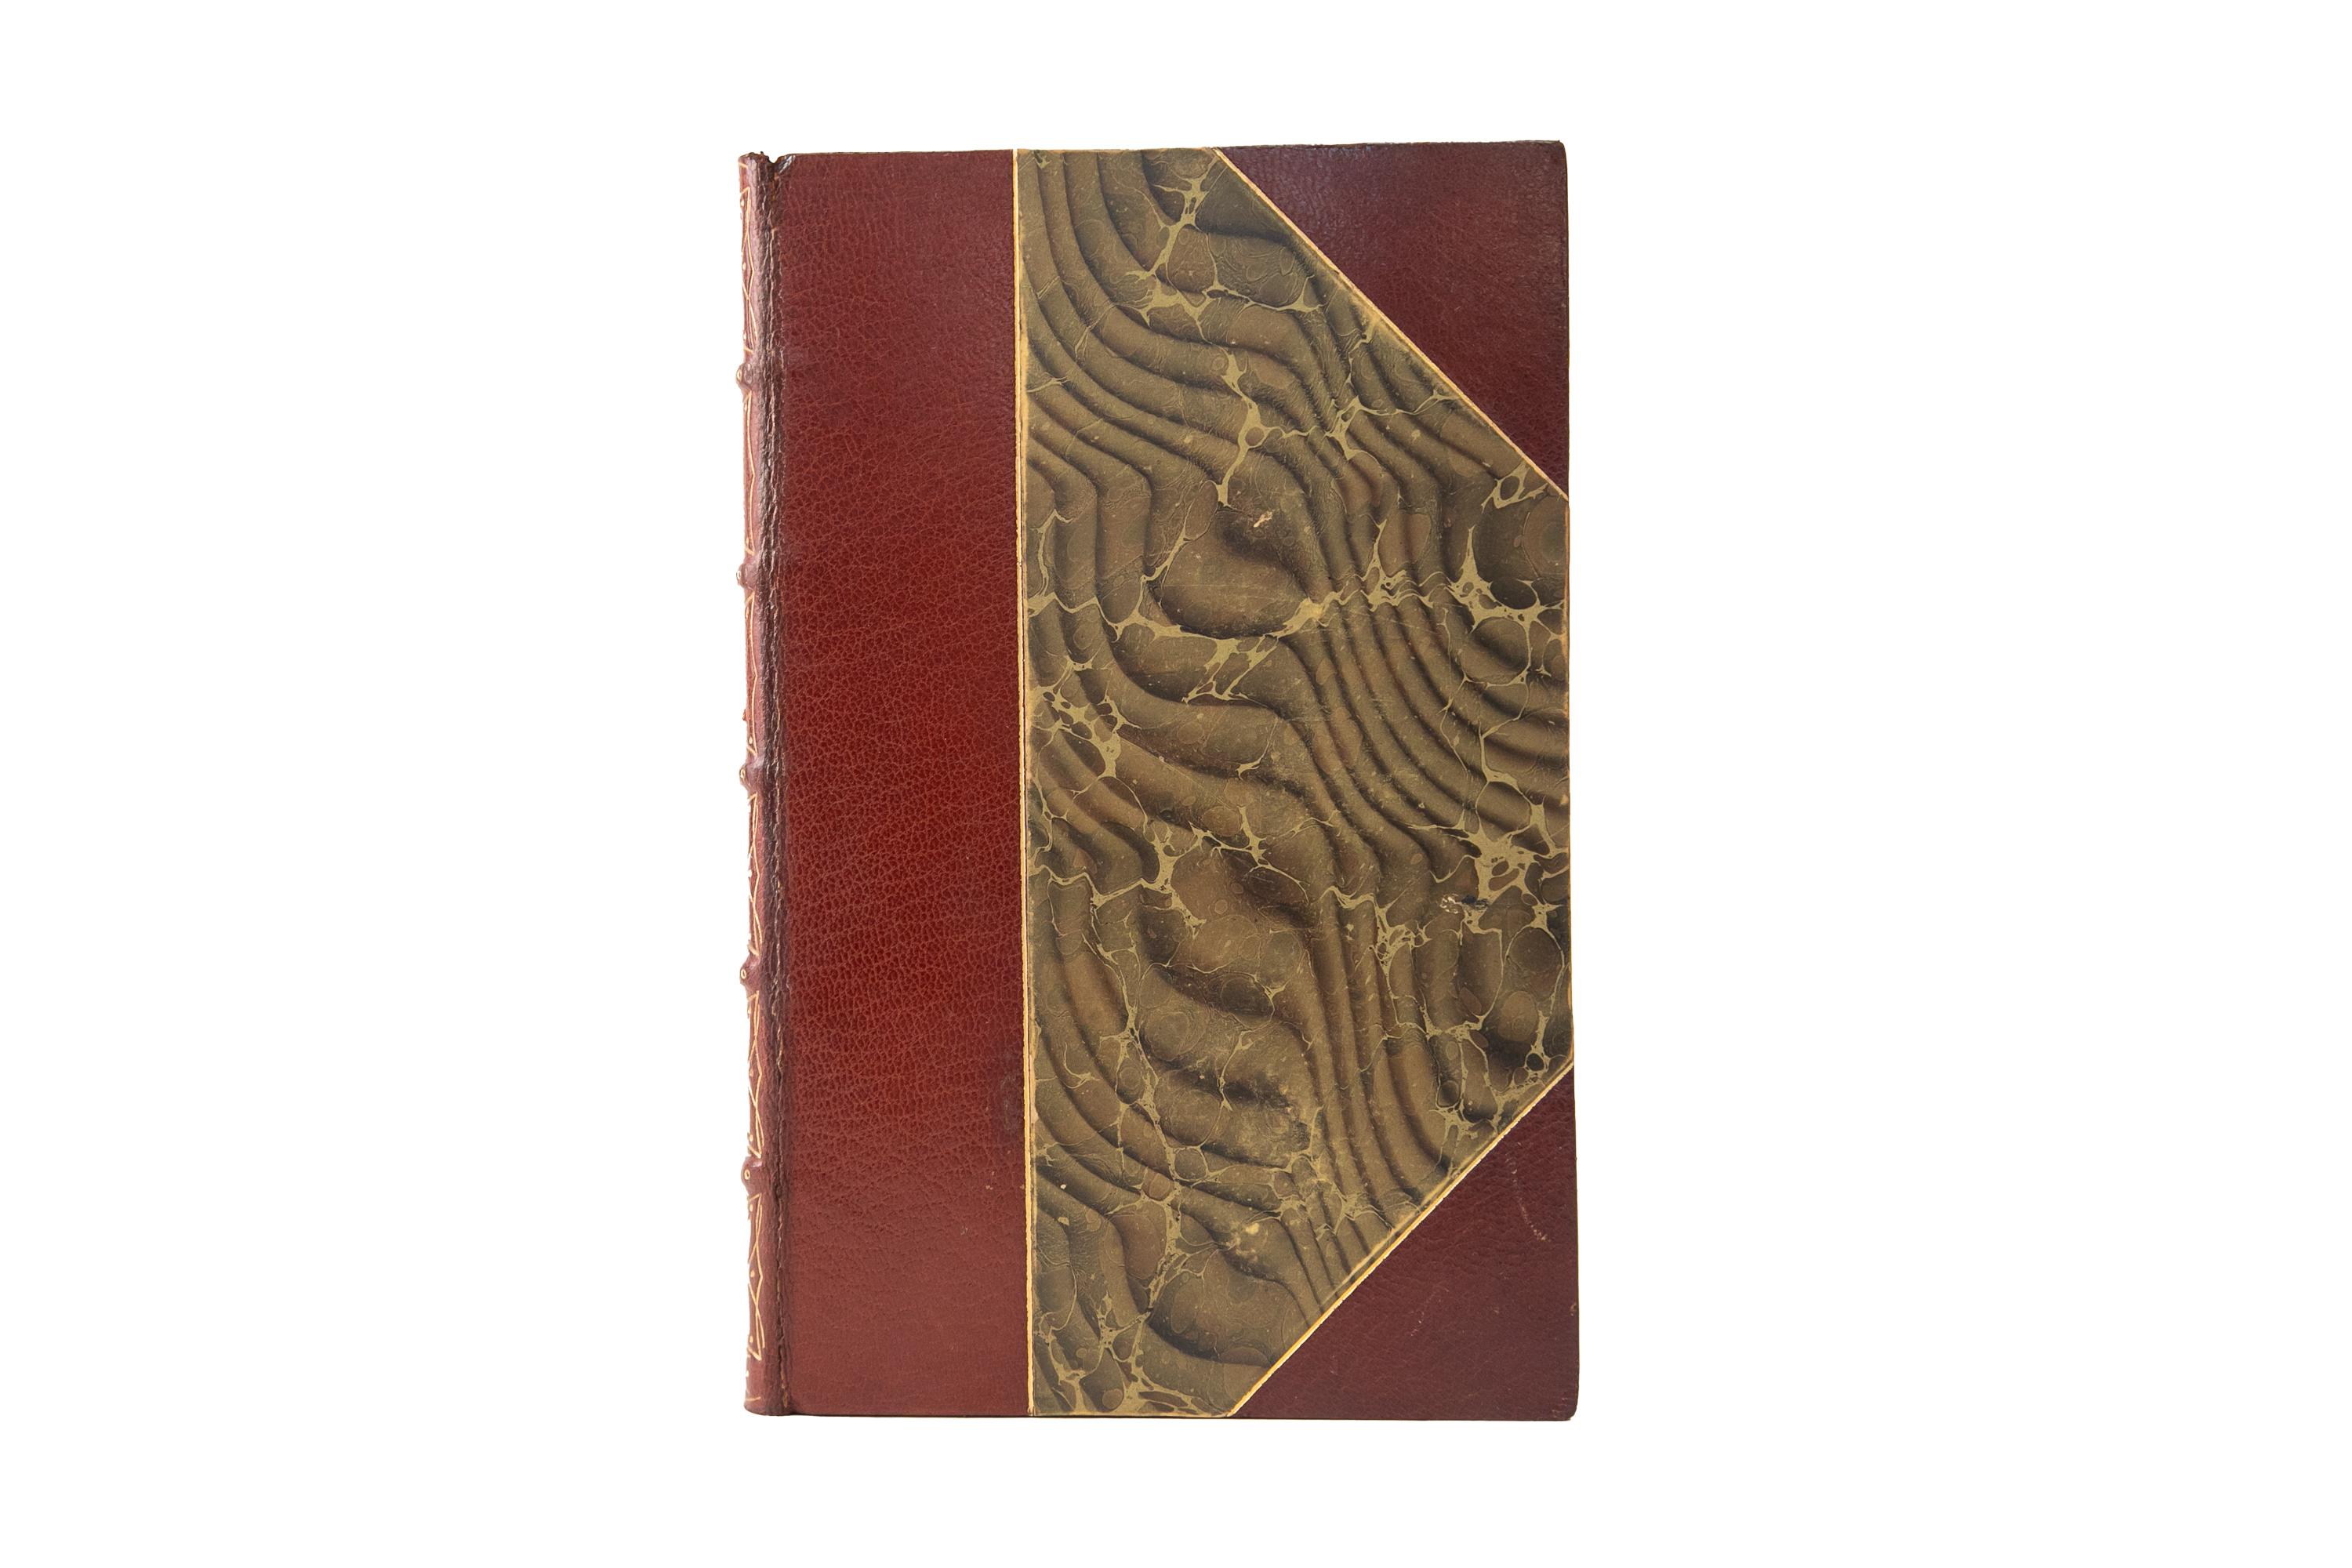 9 Volumes. Horace Walpole, The Letters. Bound in 3/4 brown morocco and marbled boards, bordered in gilt-tooling. Raised band spines with gilt-tooled detailing. The top edges are gilded with marbled endpapers. Includes a portrait frontispiece and